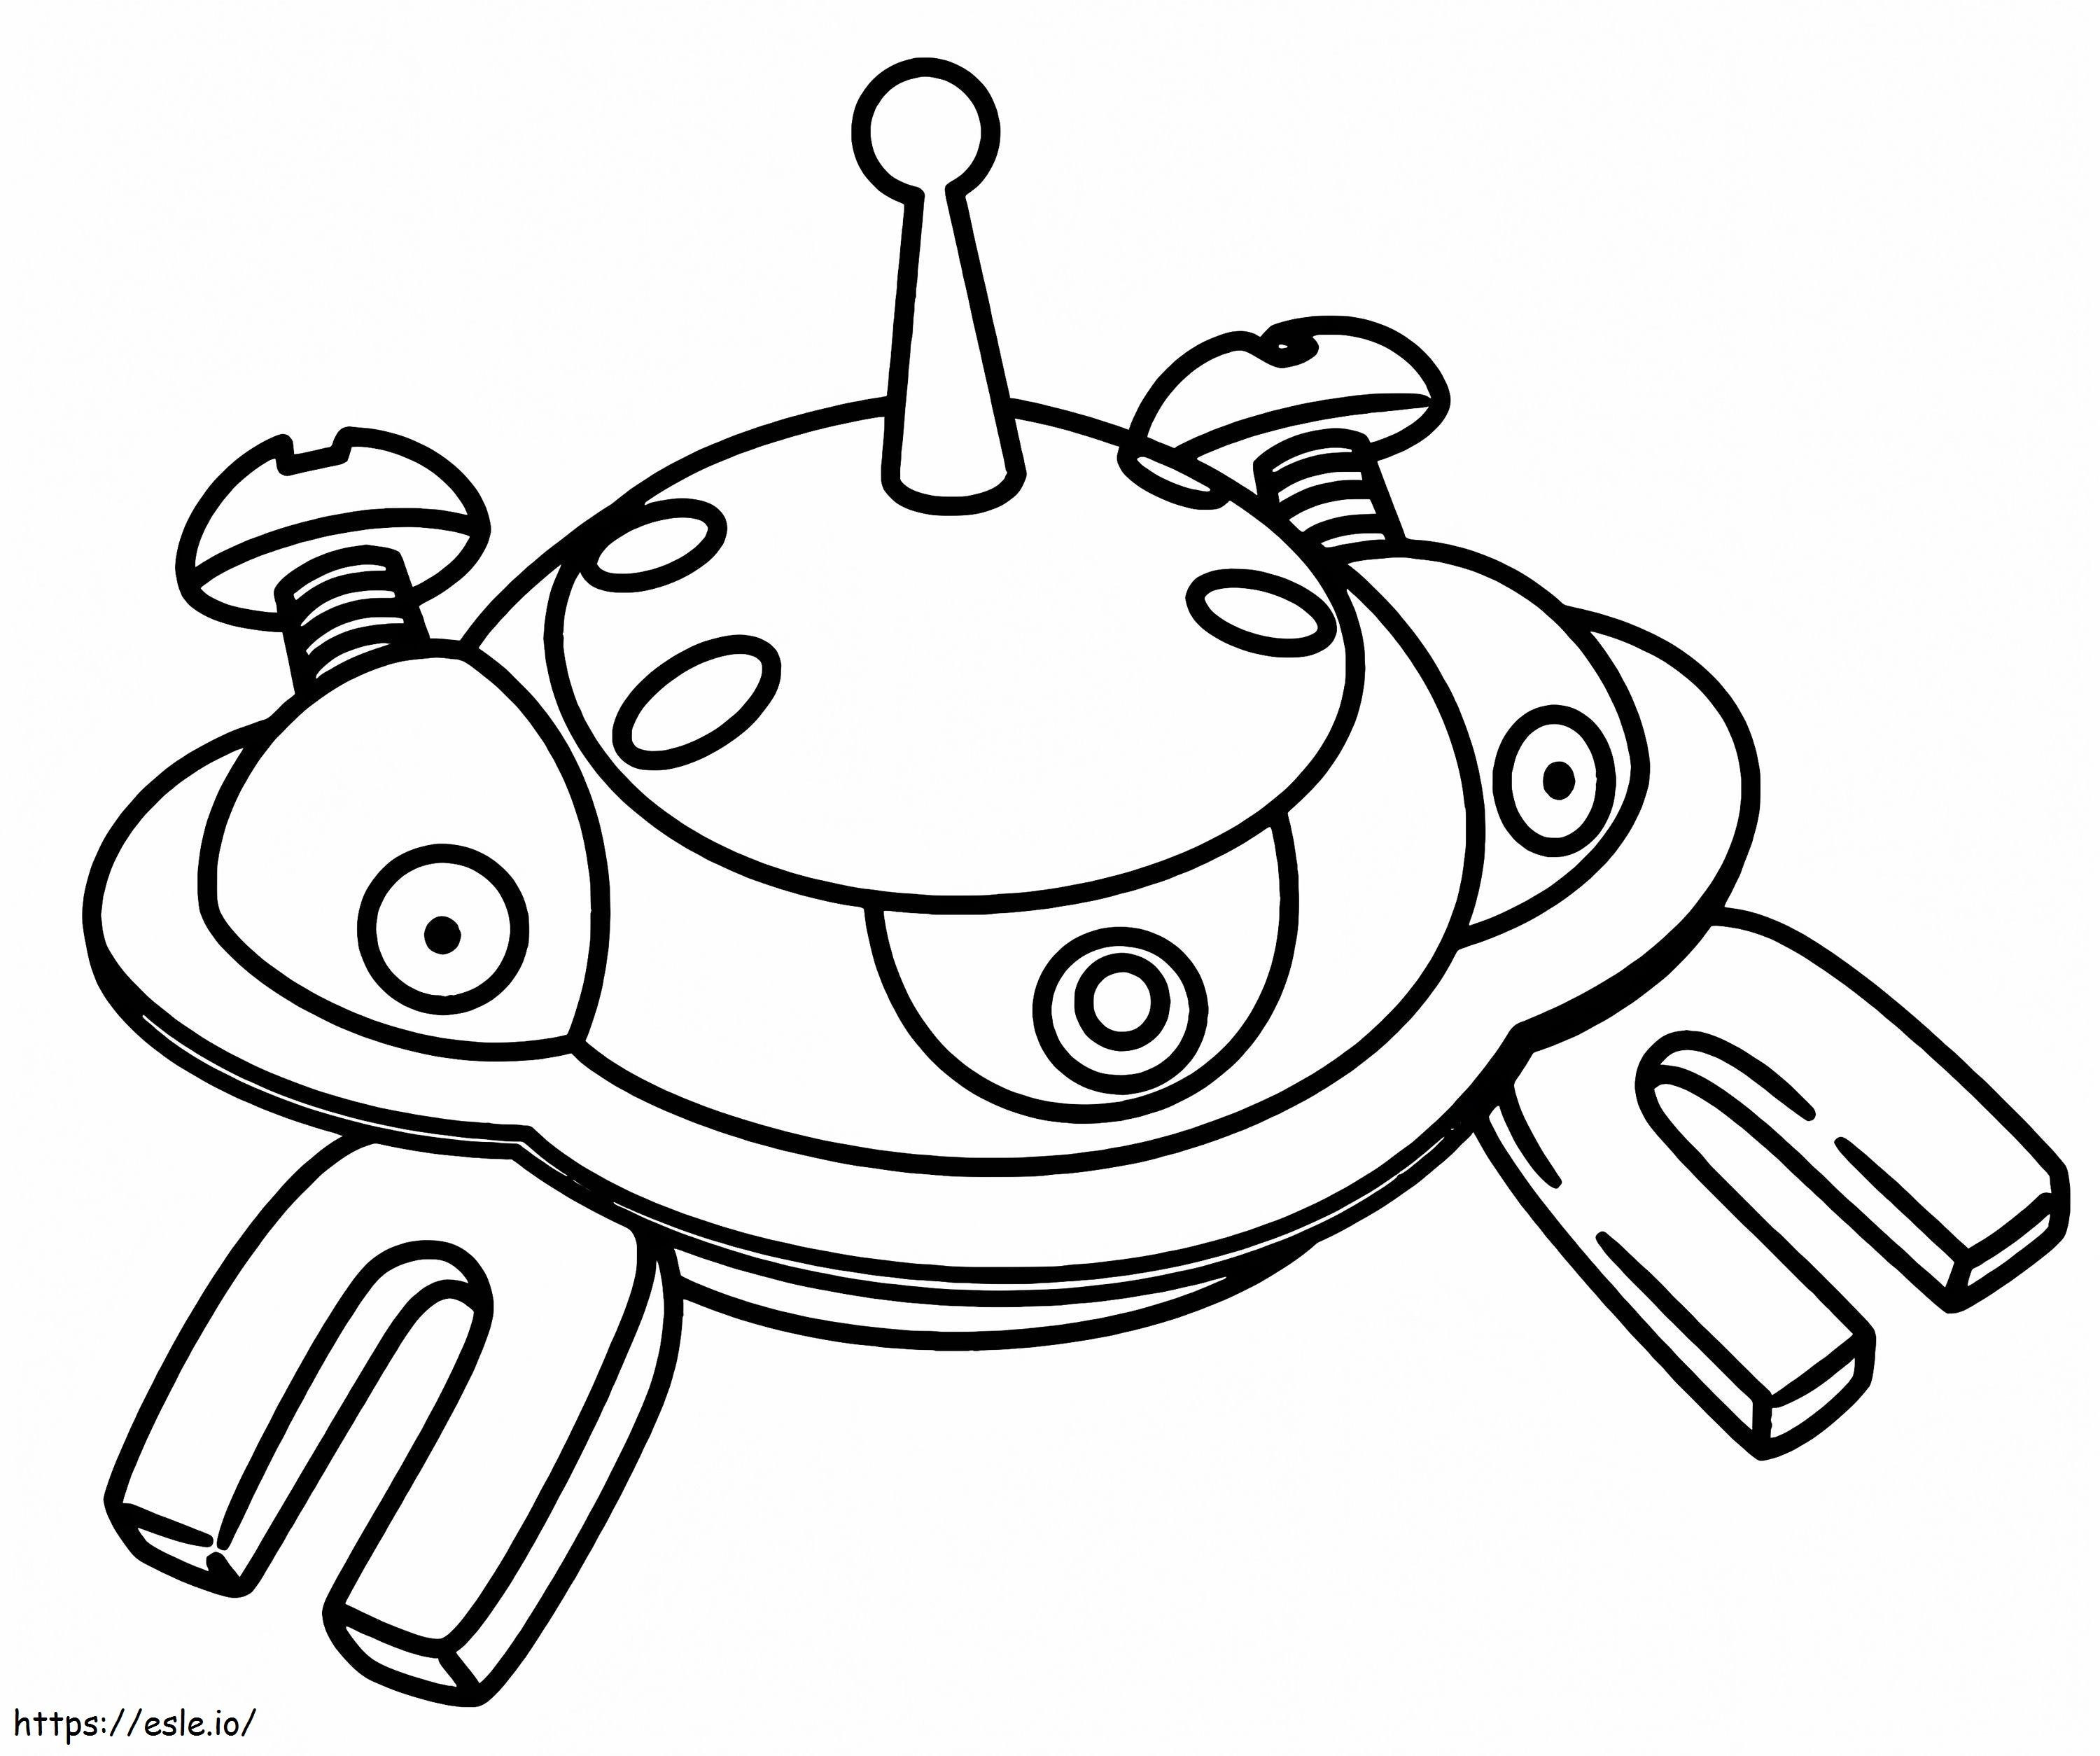 Printable Magnezone coloring page